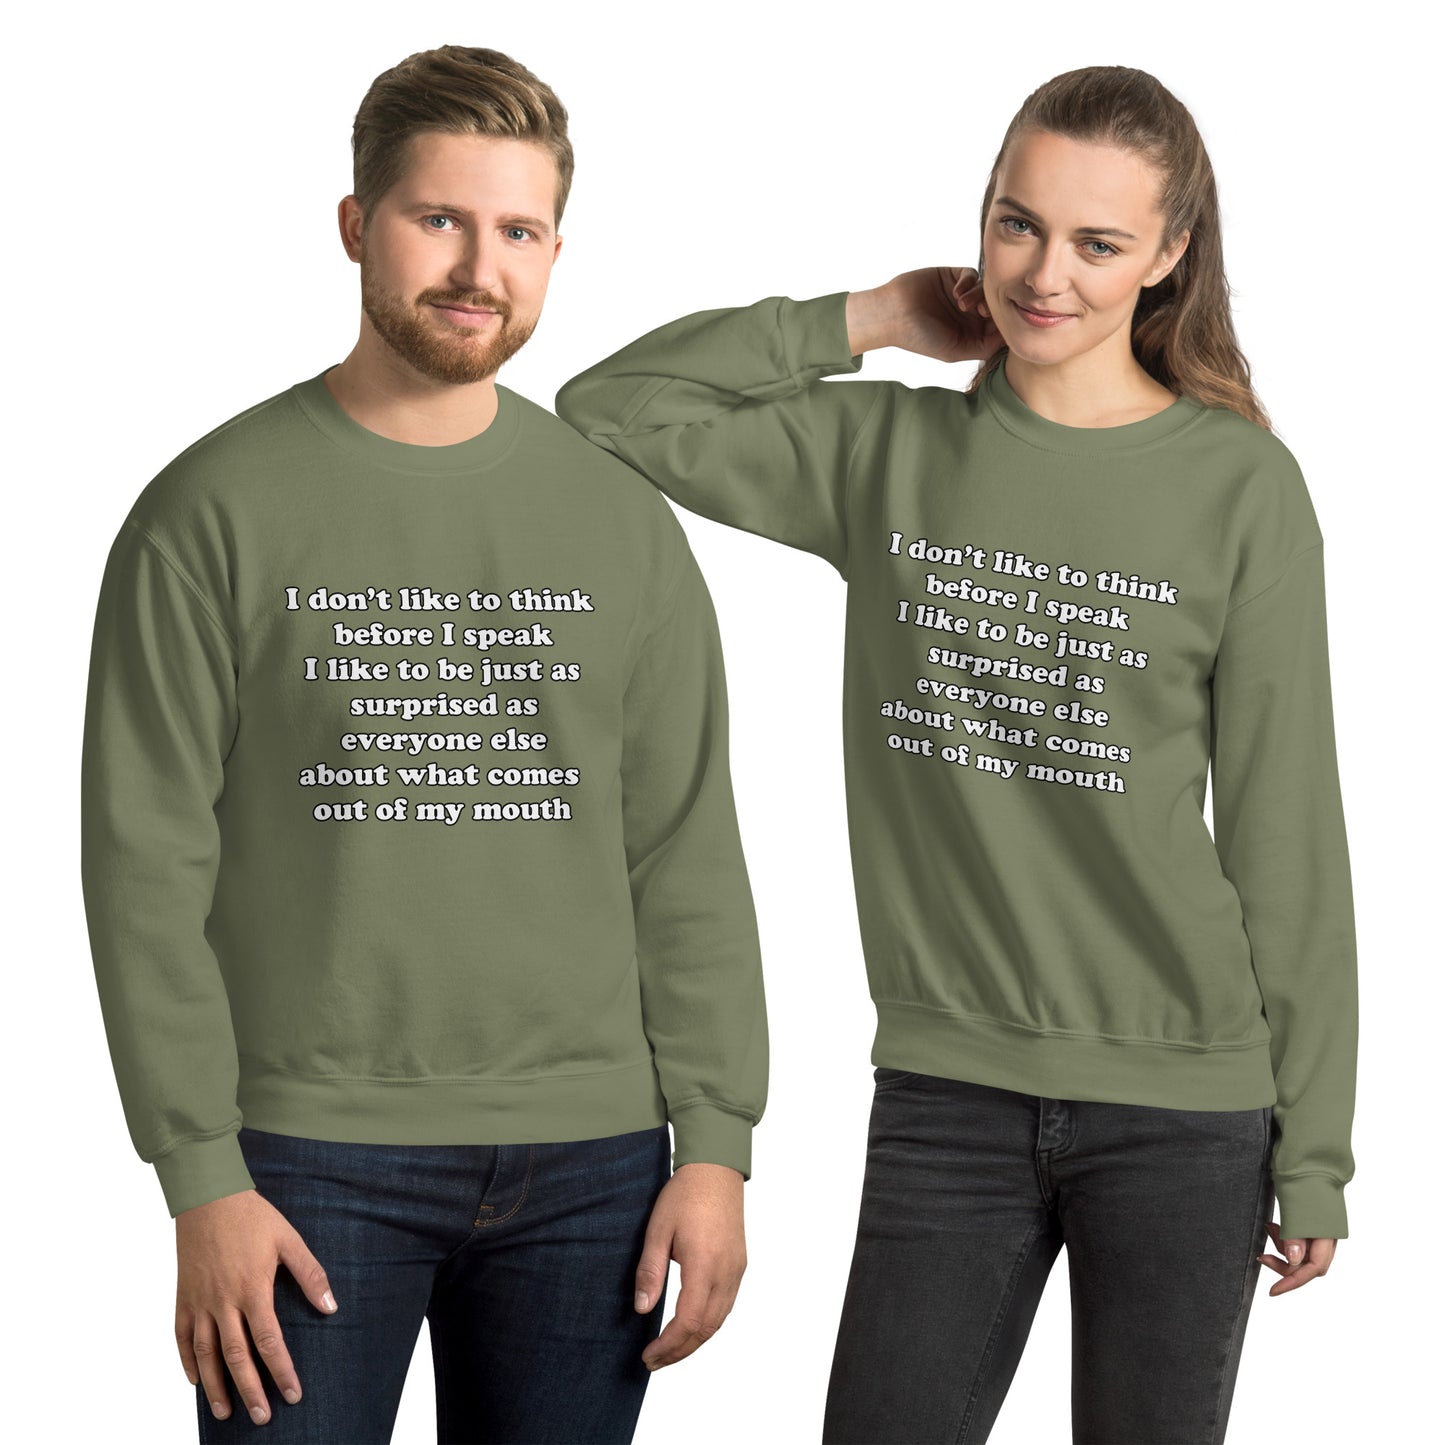 Man and woman with military green sweatshirt with text “I don't think before I speak Just as serprised as everyone about what comes out of my mouth"